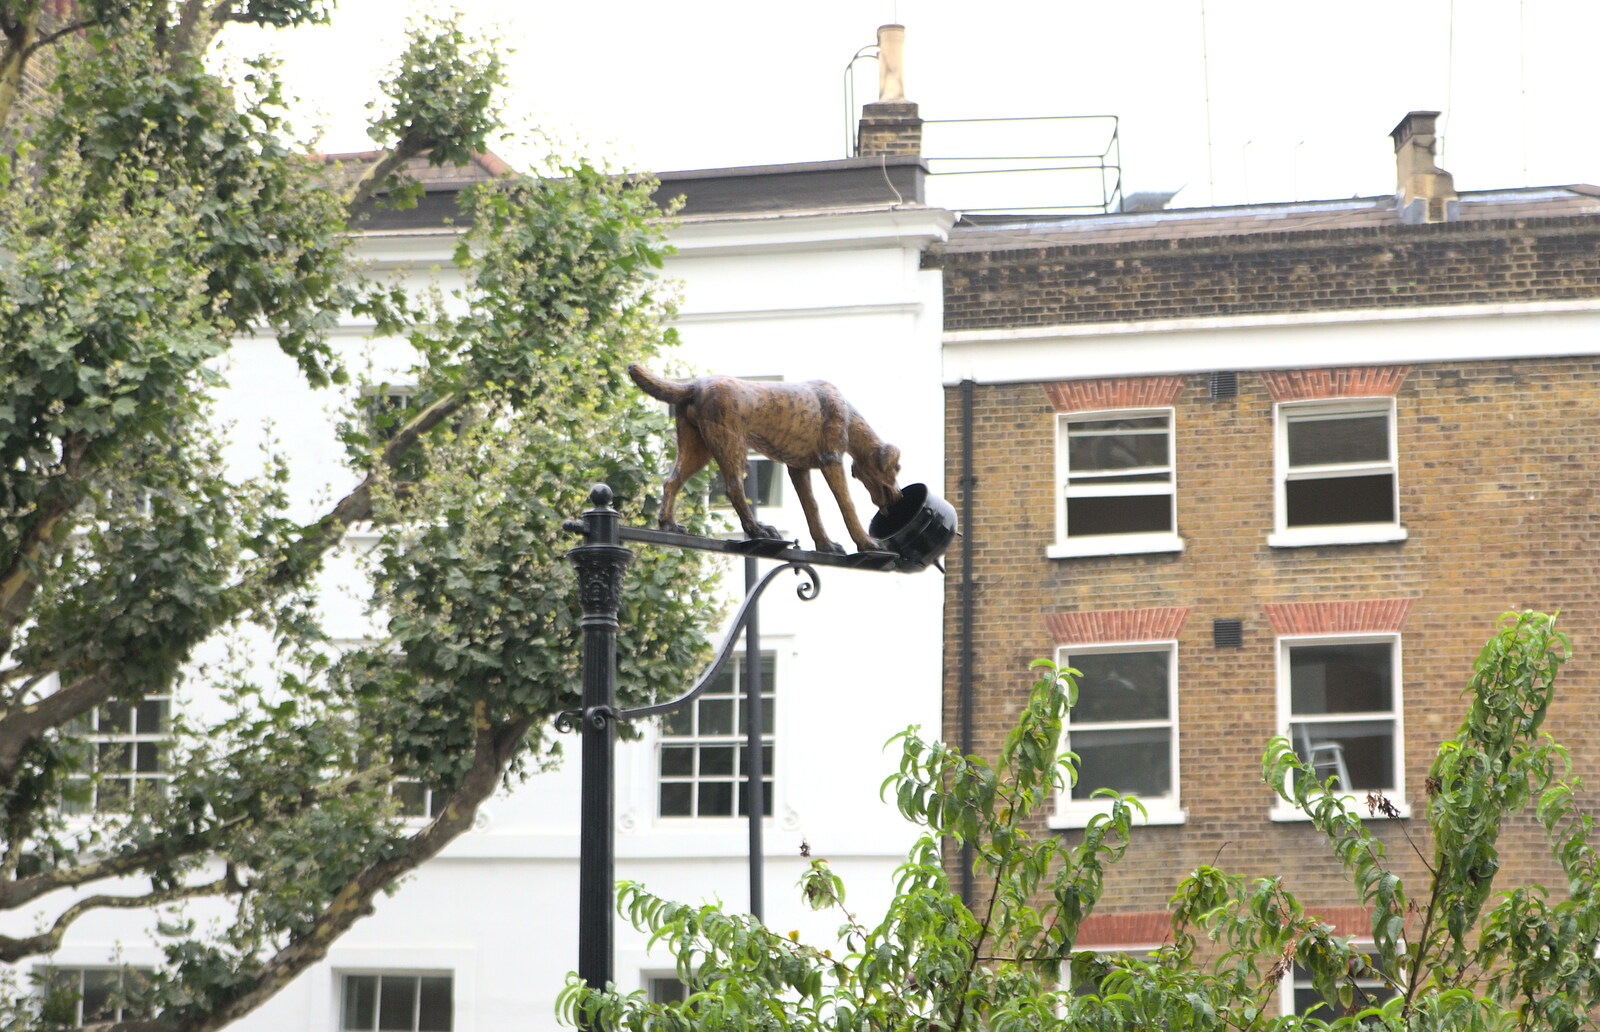 A statue of a dog eating out of a cooking pot from Fred's Cast and a SwiftKey Lunch, Waterloo, London - 18th August 2015